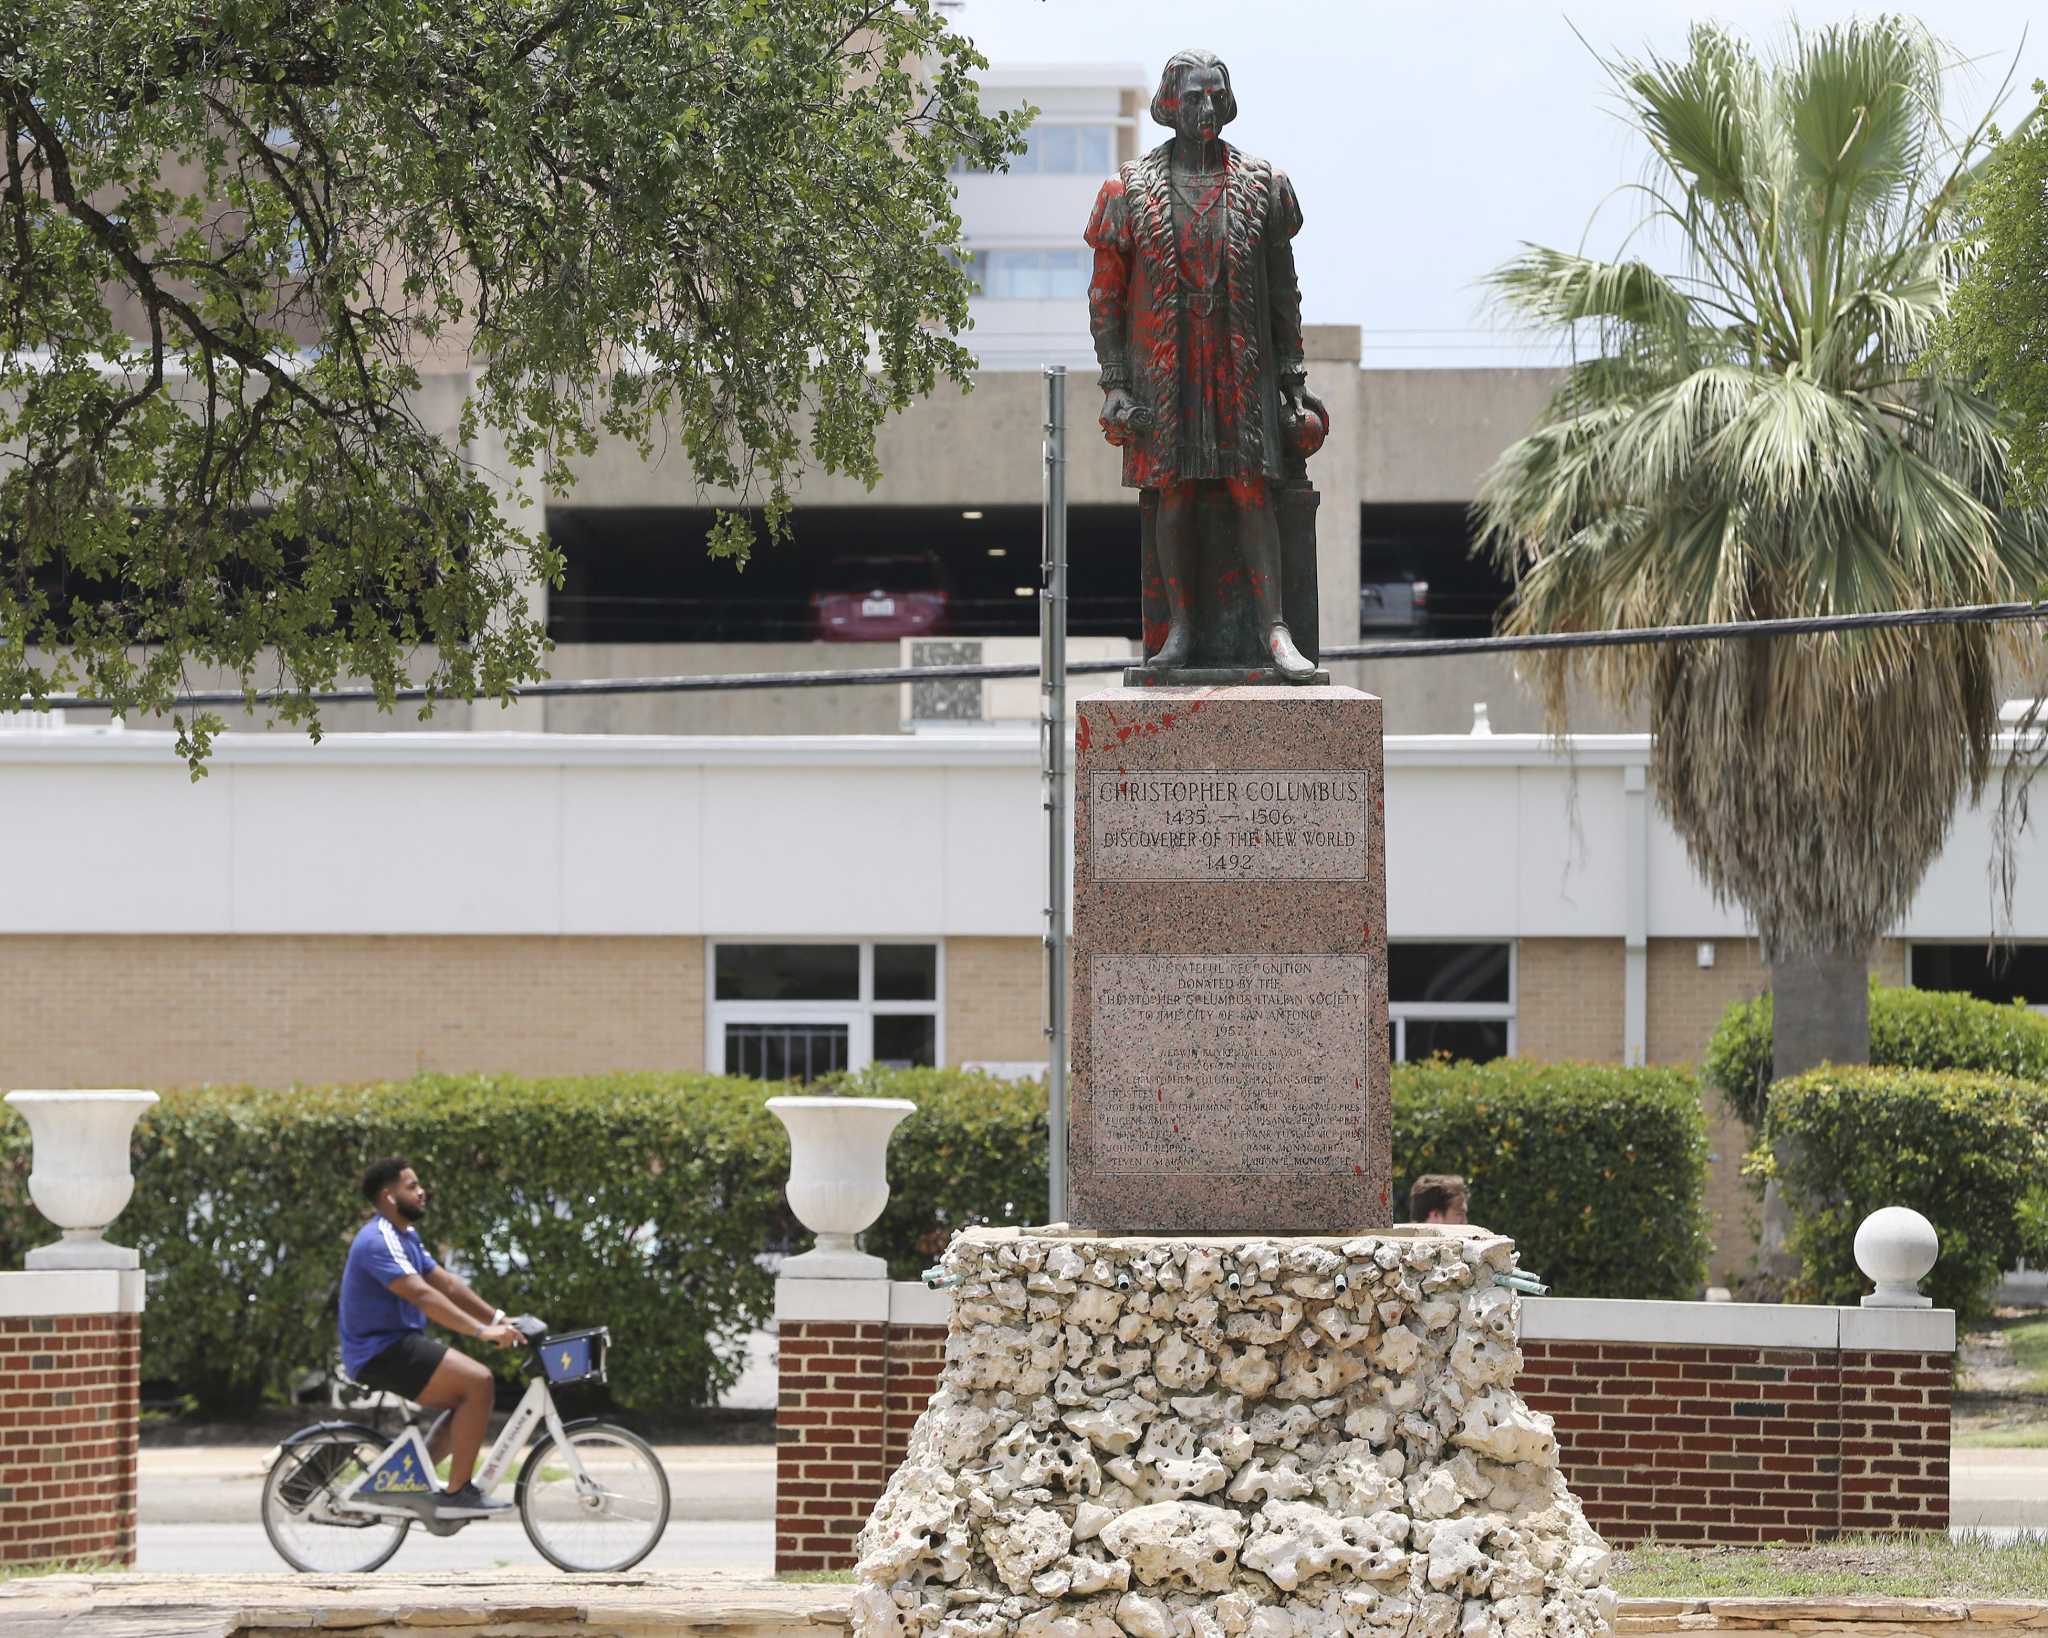 San Antonio to remove Christopher Columbus statue before deciding its permanent fate in August - San Antonio Express-News